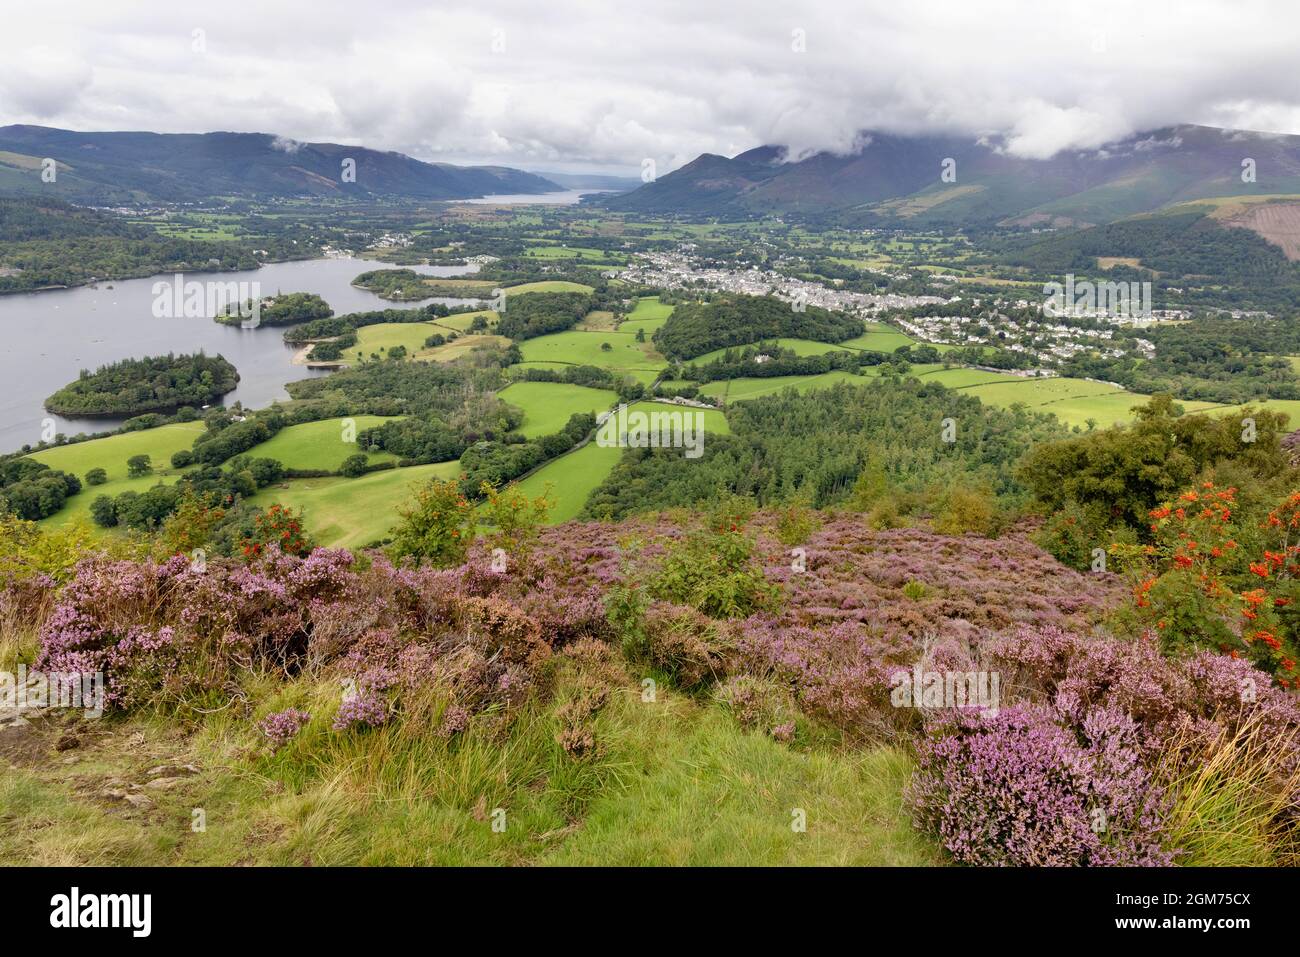 The Lake District UK, landscape - Derwentwater and the town of Keswick in summer with heather in bloom, seen from Walla Crag, Cumbria UK Stock Photo